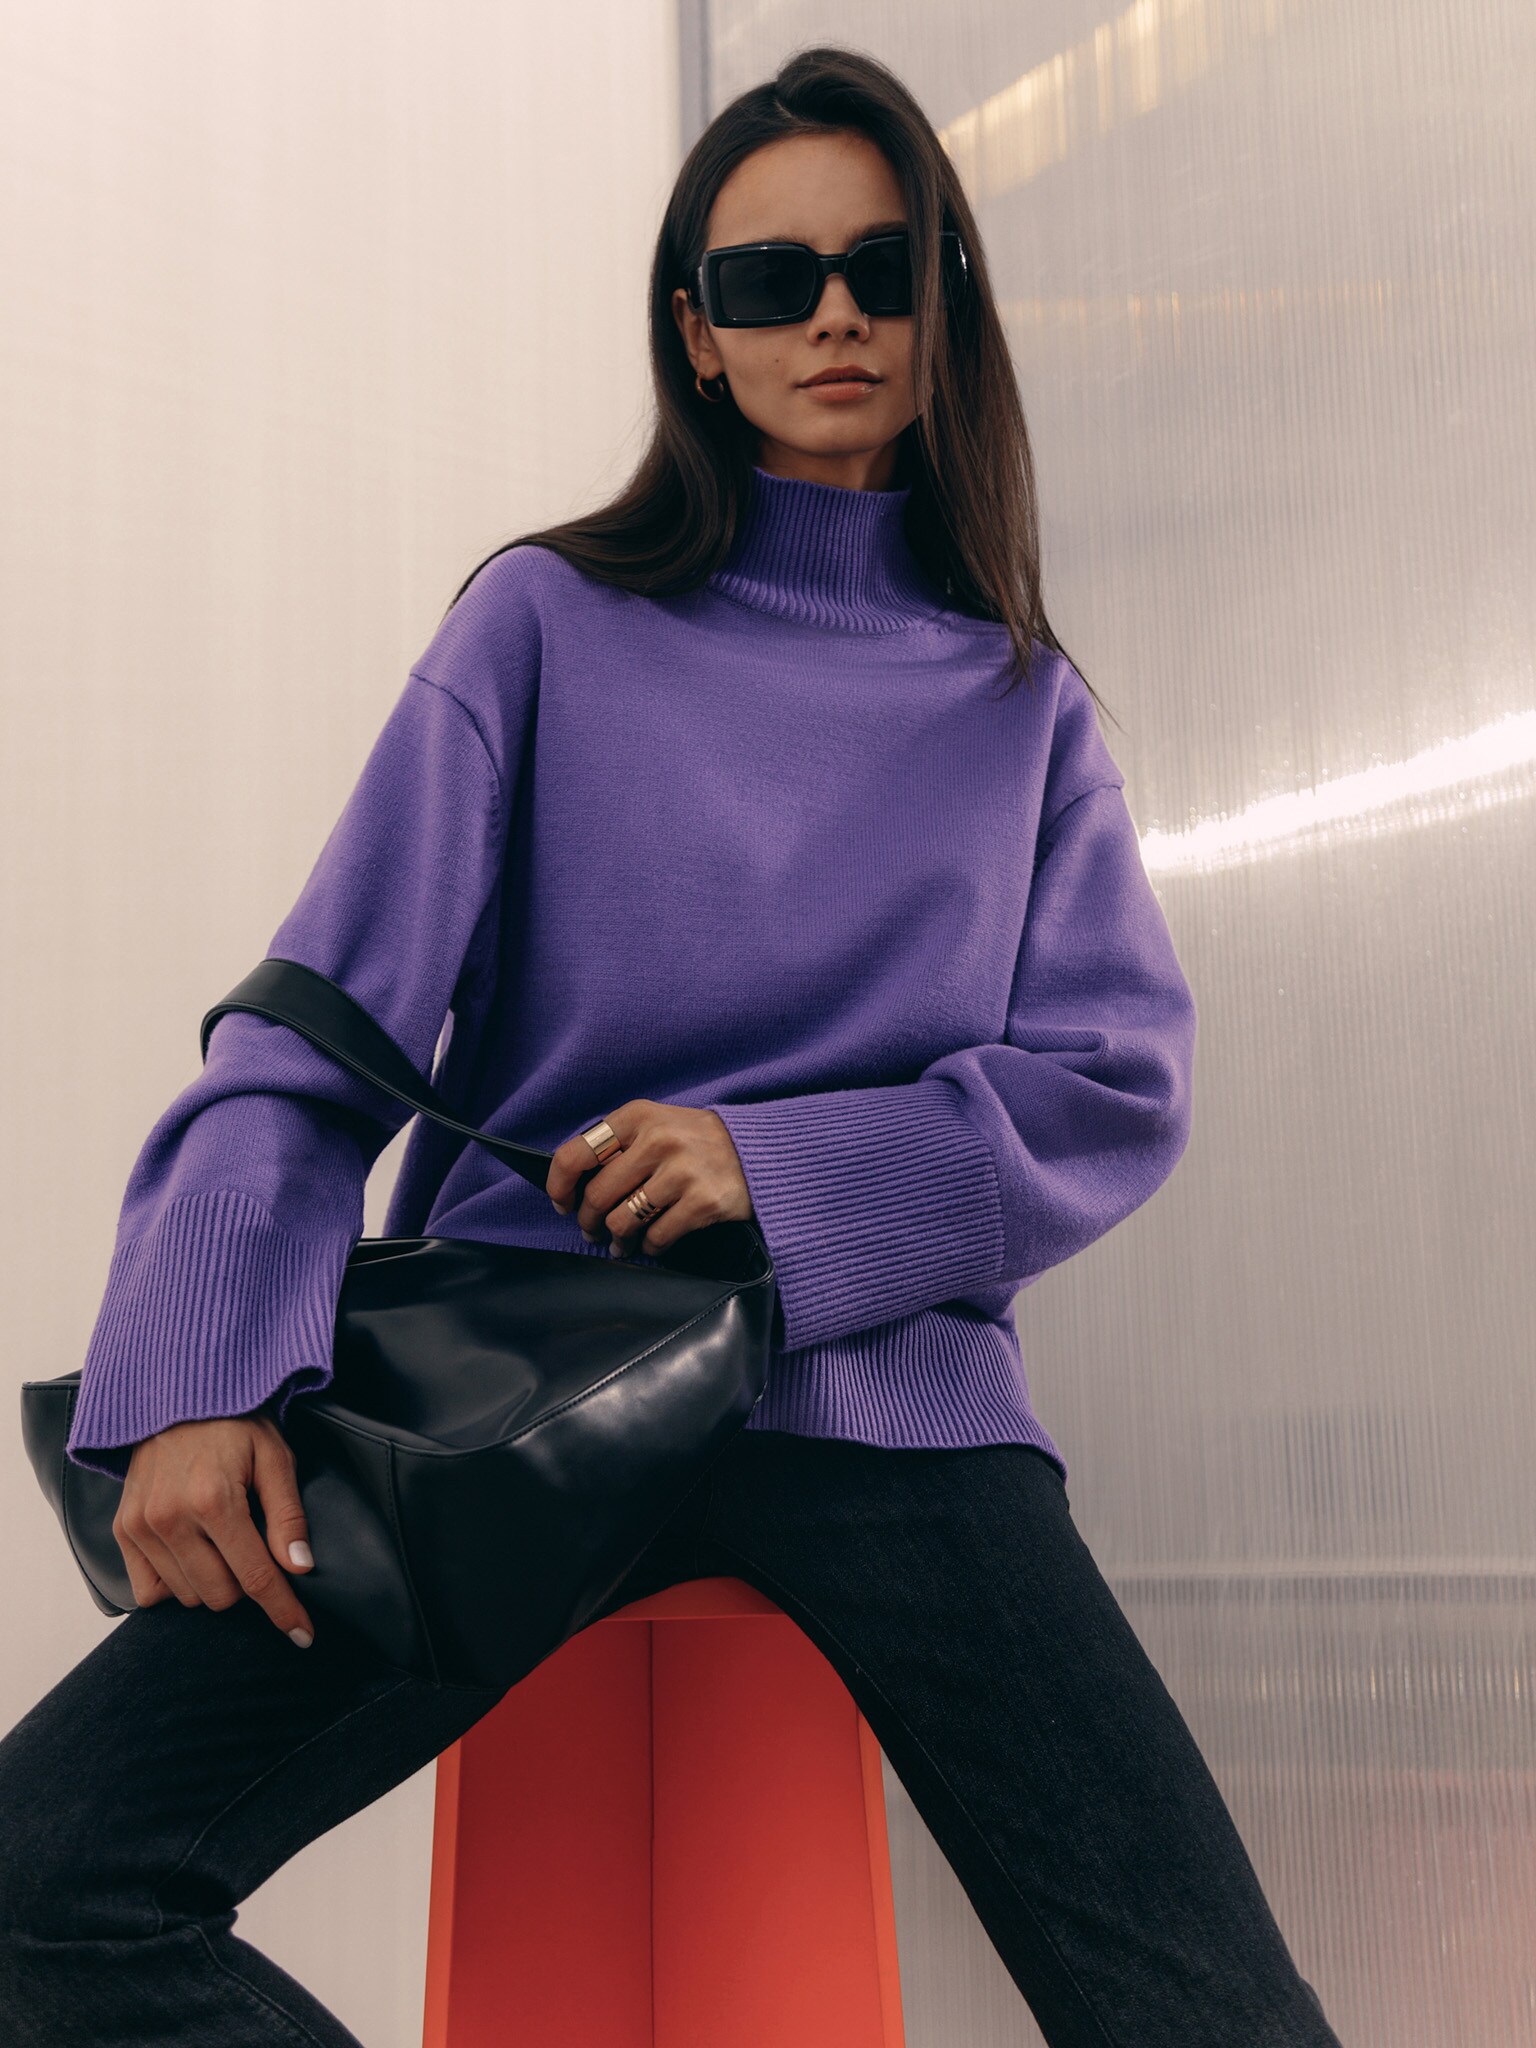  Other Stories mock neck sweater in lilac